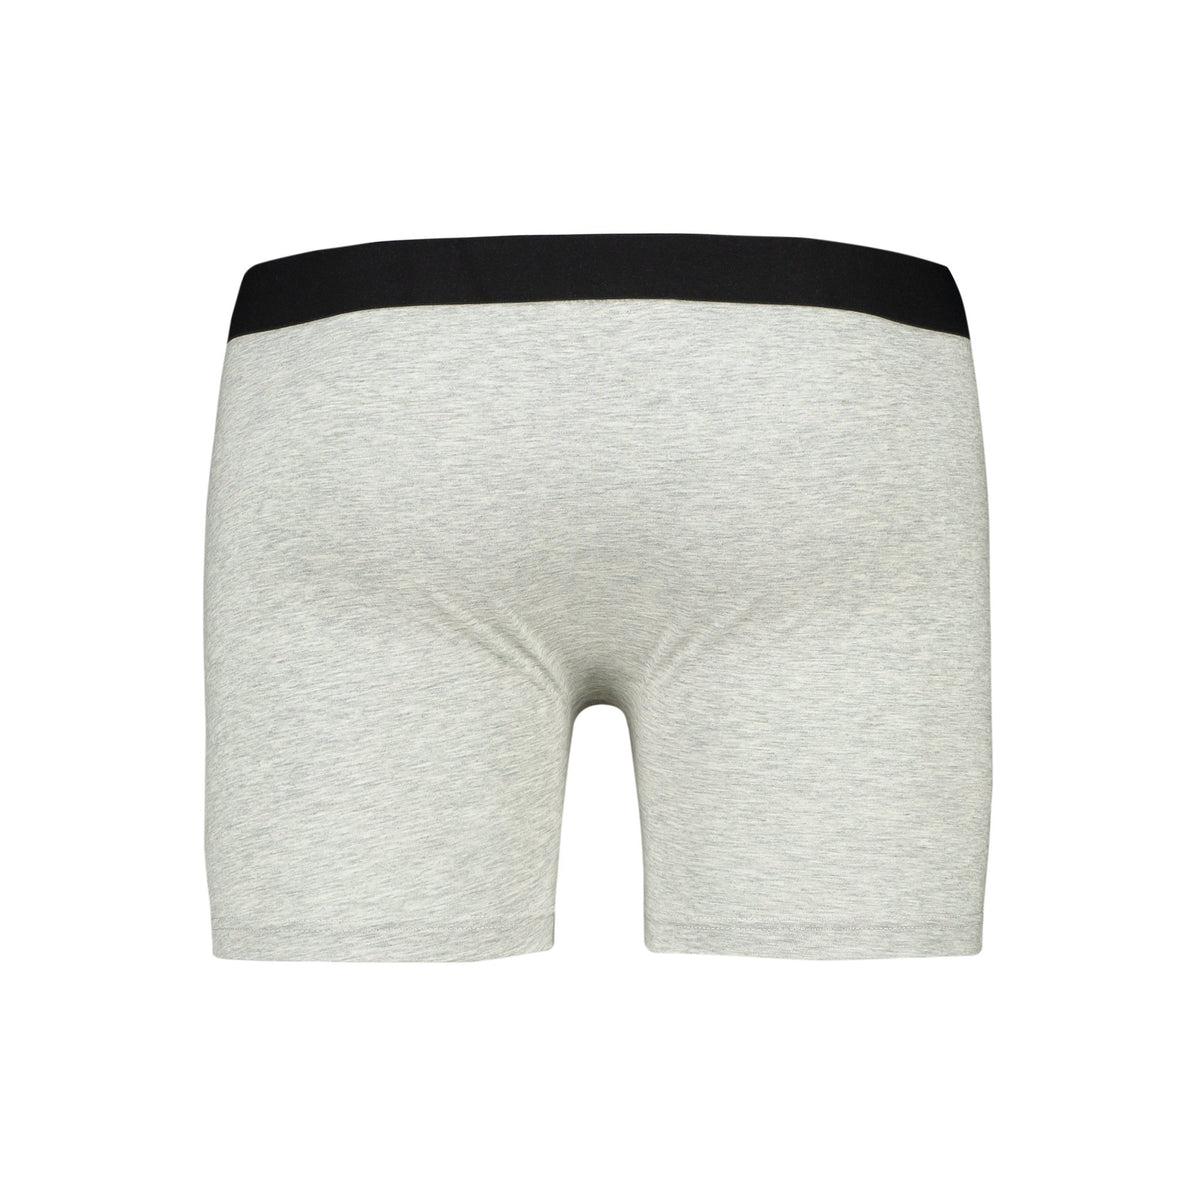 Grey All-in-One Packing Boxers  Best FTM Essential Underwear – Paxsies